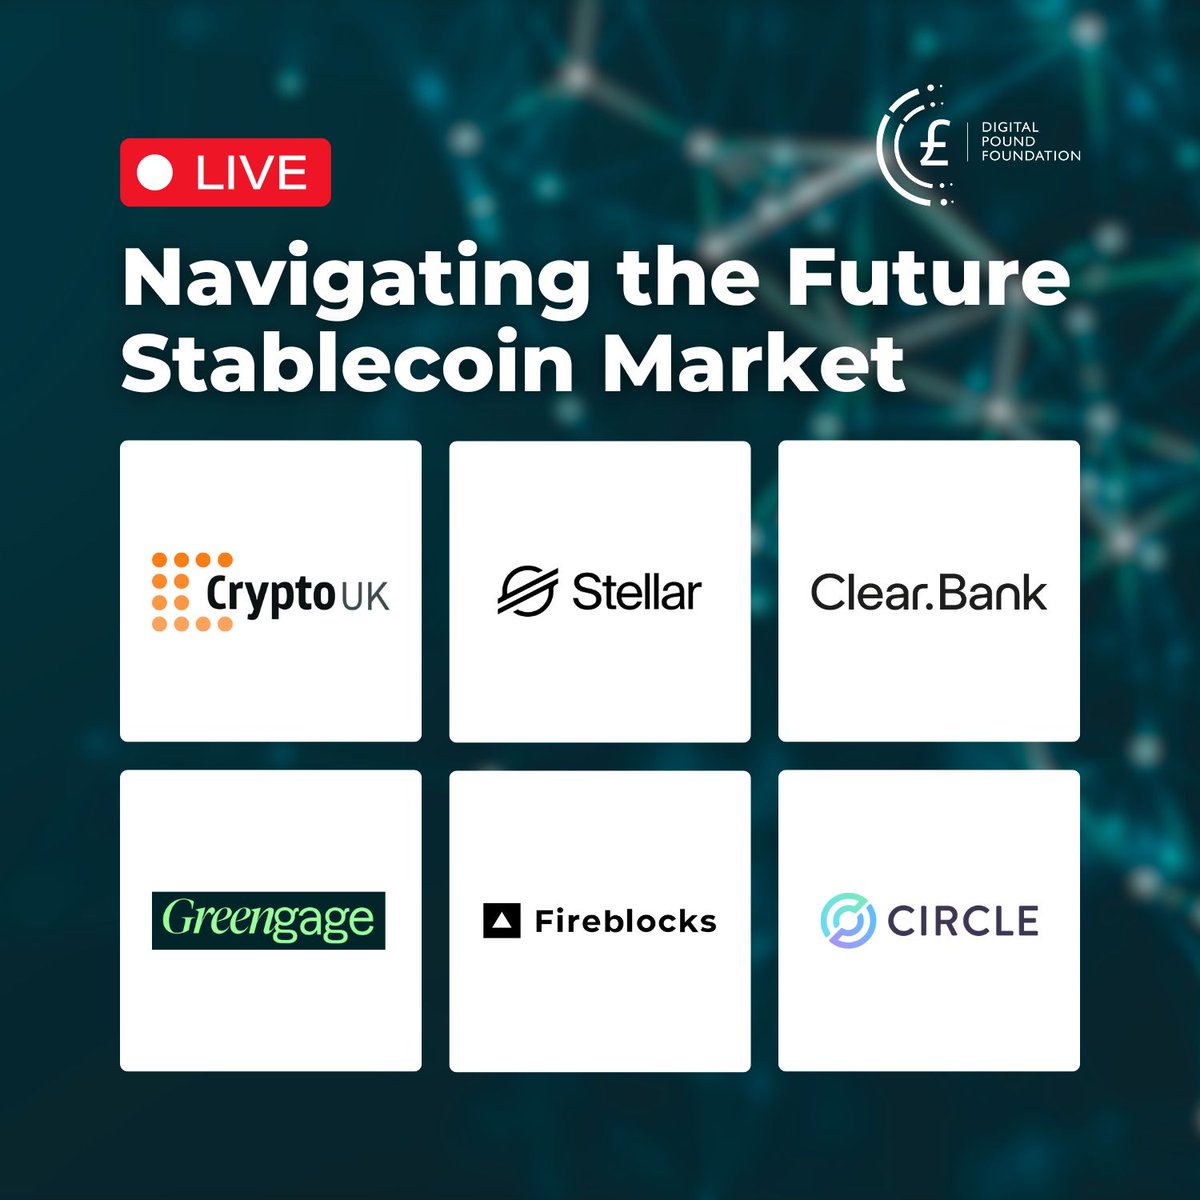 We're live!! 🔴 Don't worry, you can still join in 👉 buff.ly/4aj7QfZ ... #Crypto #UK #Stellar #Clearbank #Greengage #Fireblocks #Circle #USDC #Stablecoins #Fintech #DigitalCurrencies #Blockchain